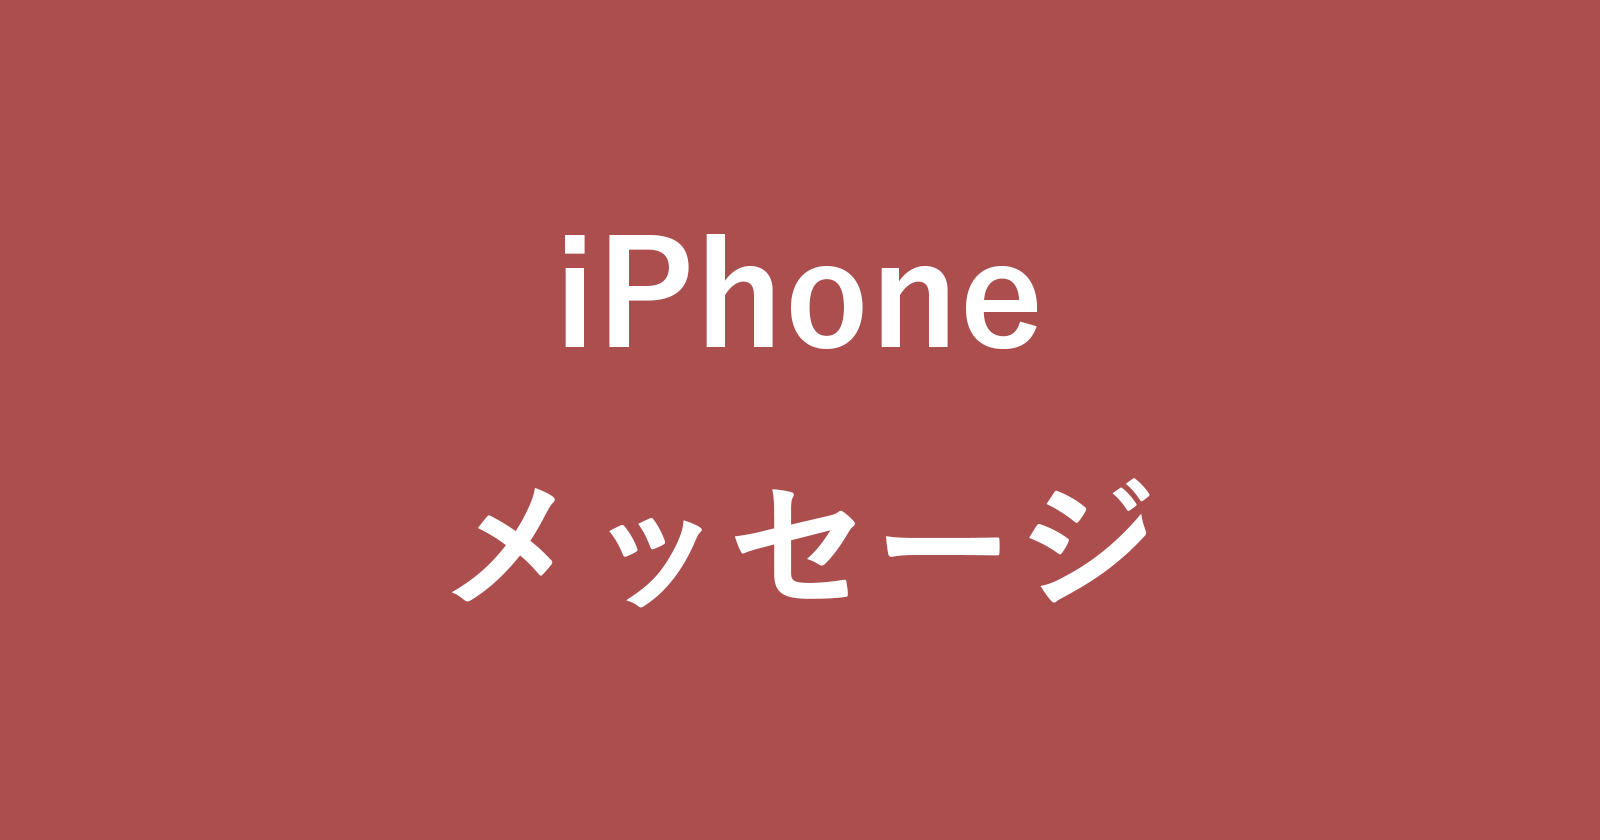 iphone message